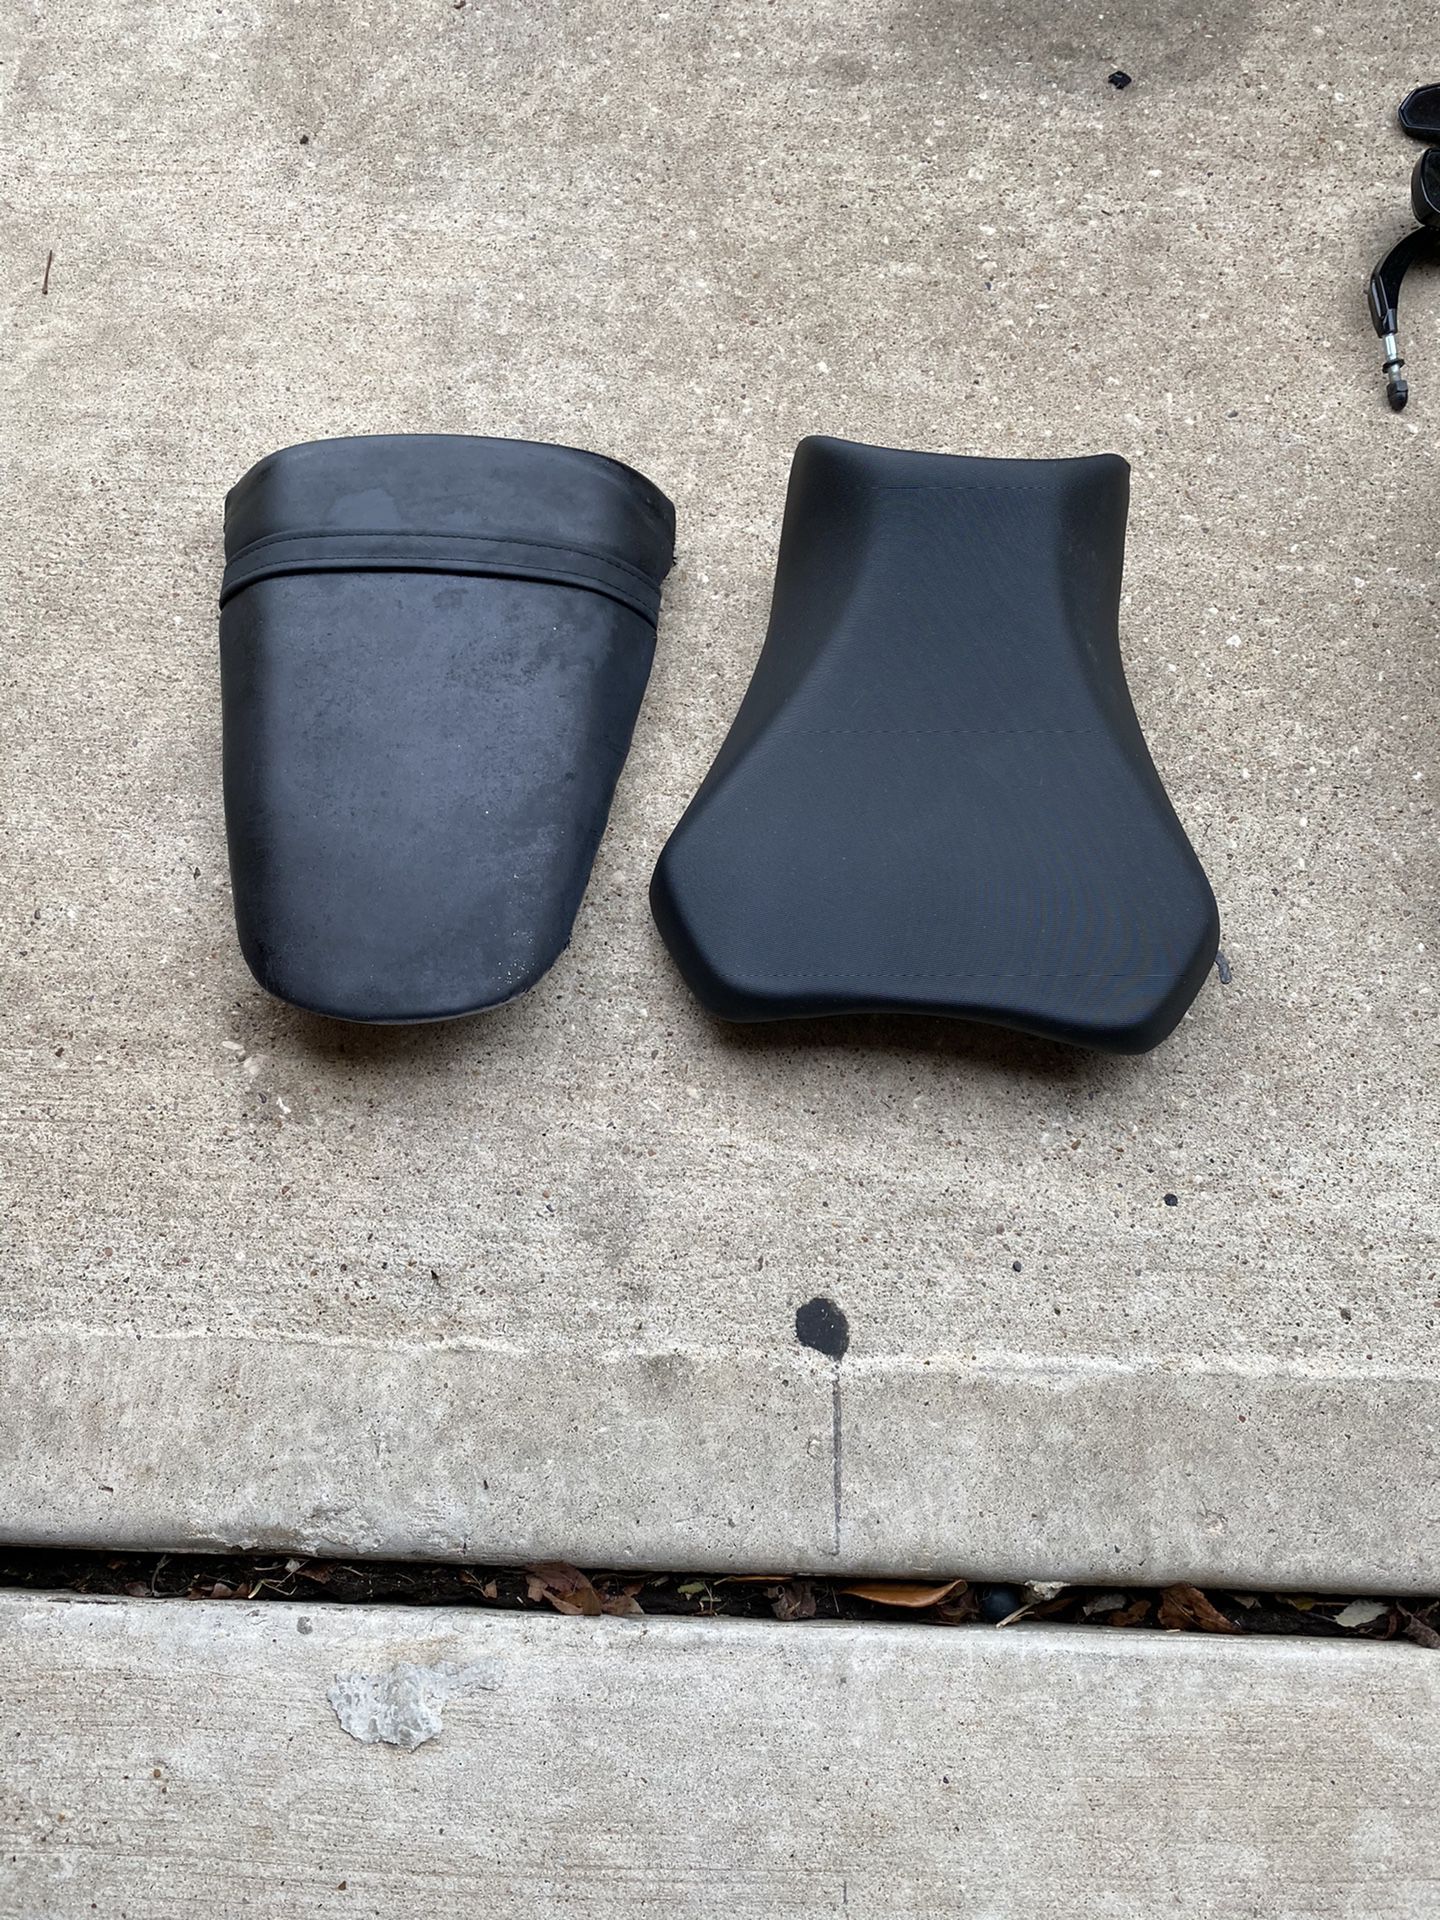 Motorcycle seats $ 50 Each ....Seat on right sold